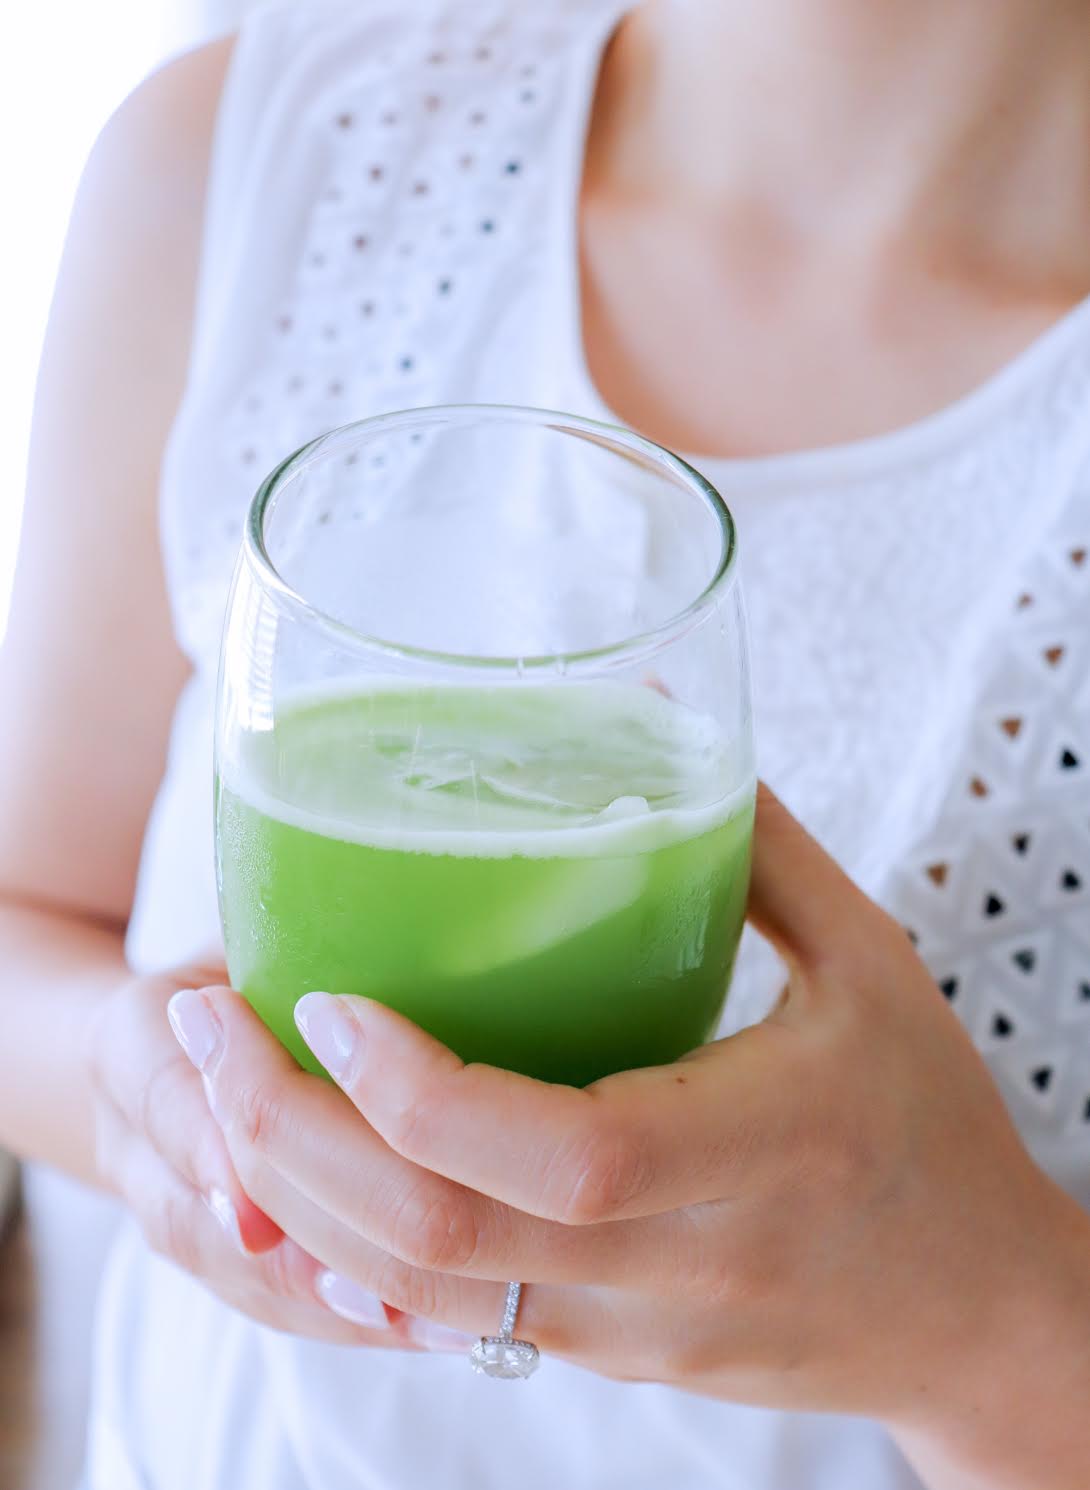 How To Make Celery & Cucumber Juice At Home Without A ...